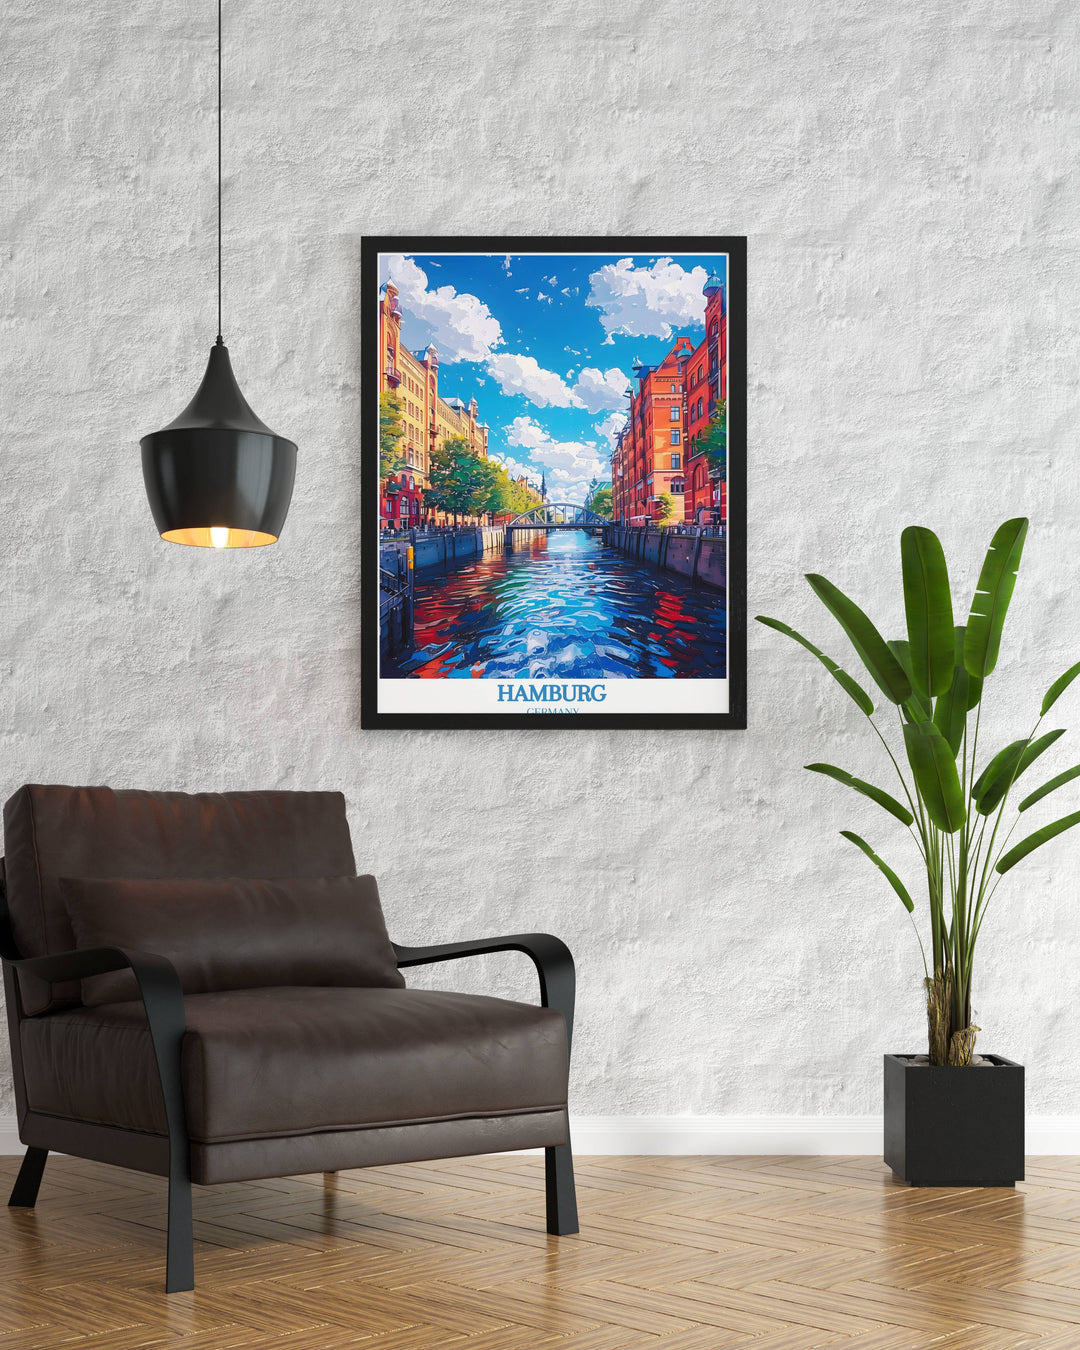 A unique Germany Painting Gift capturing the essence of a traditional Hamburg canal boat tour, framed by lush greenery and historic buildings.